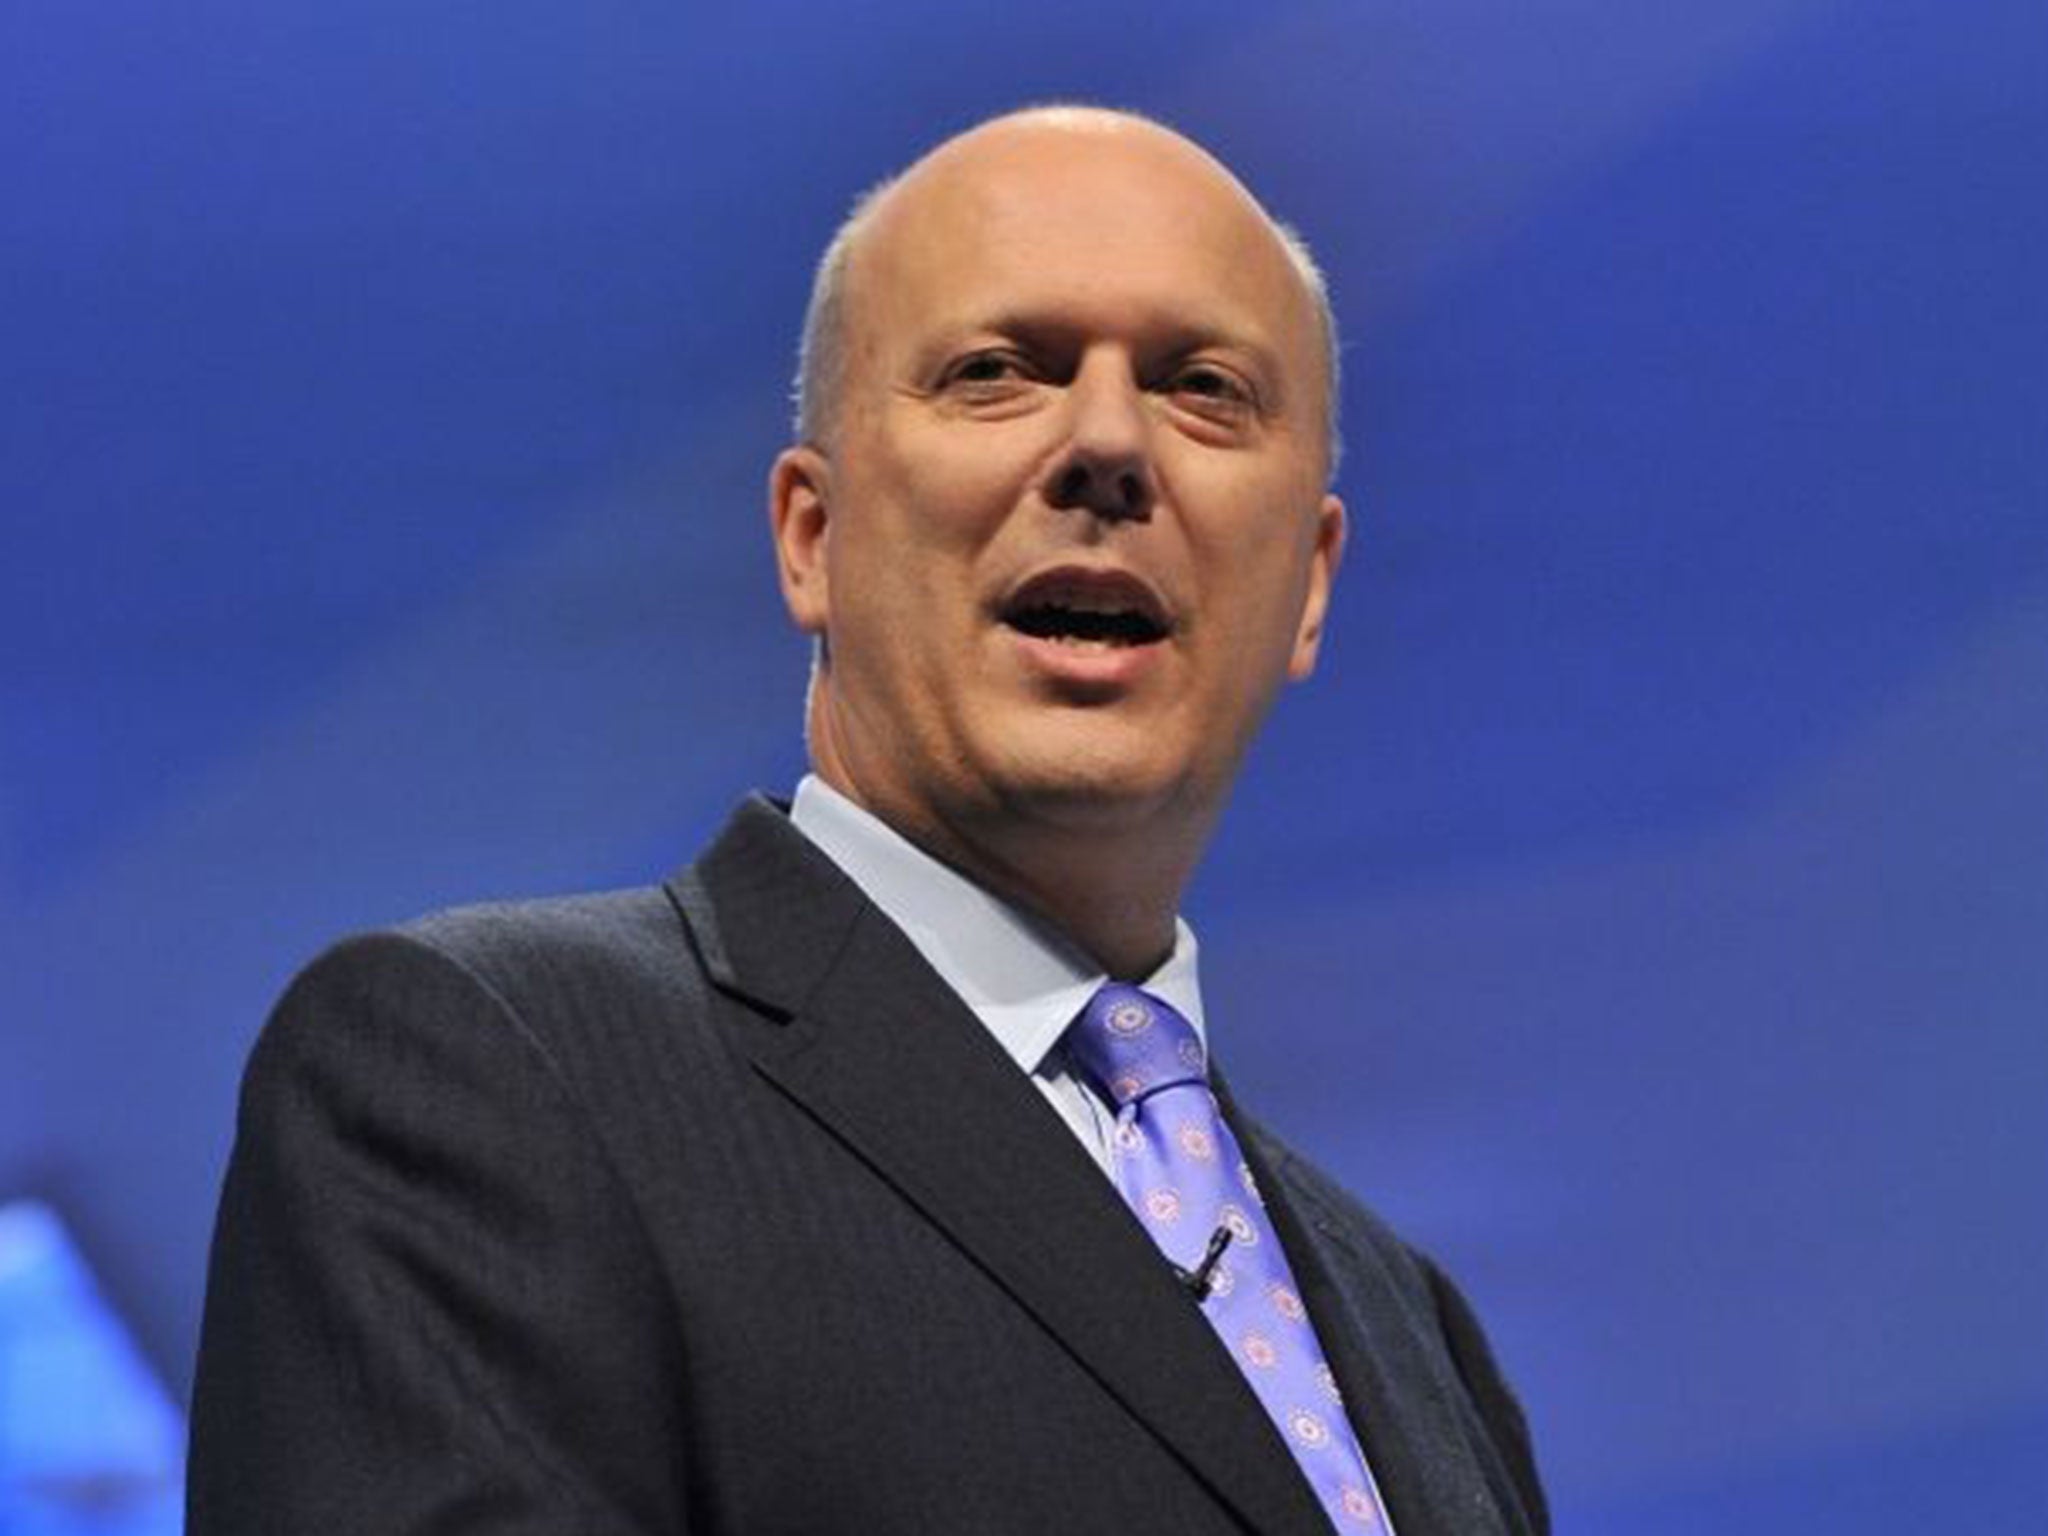 Chris Grayling, Minister of State for Employment